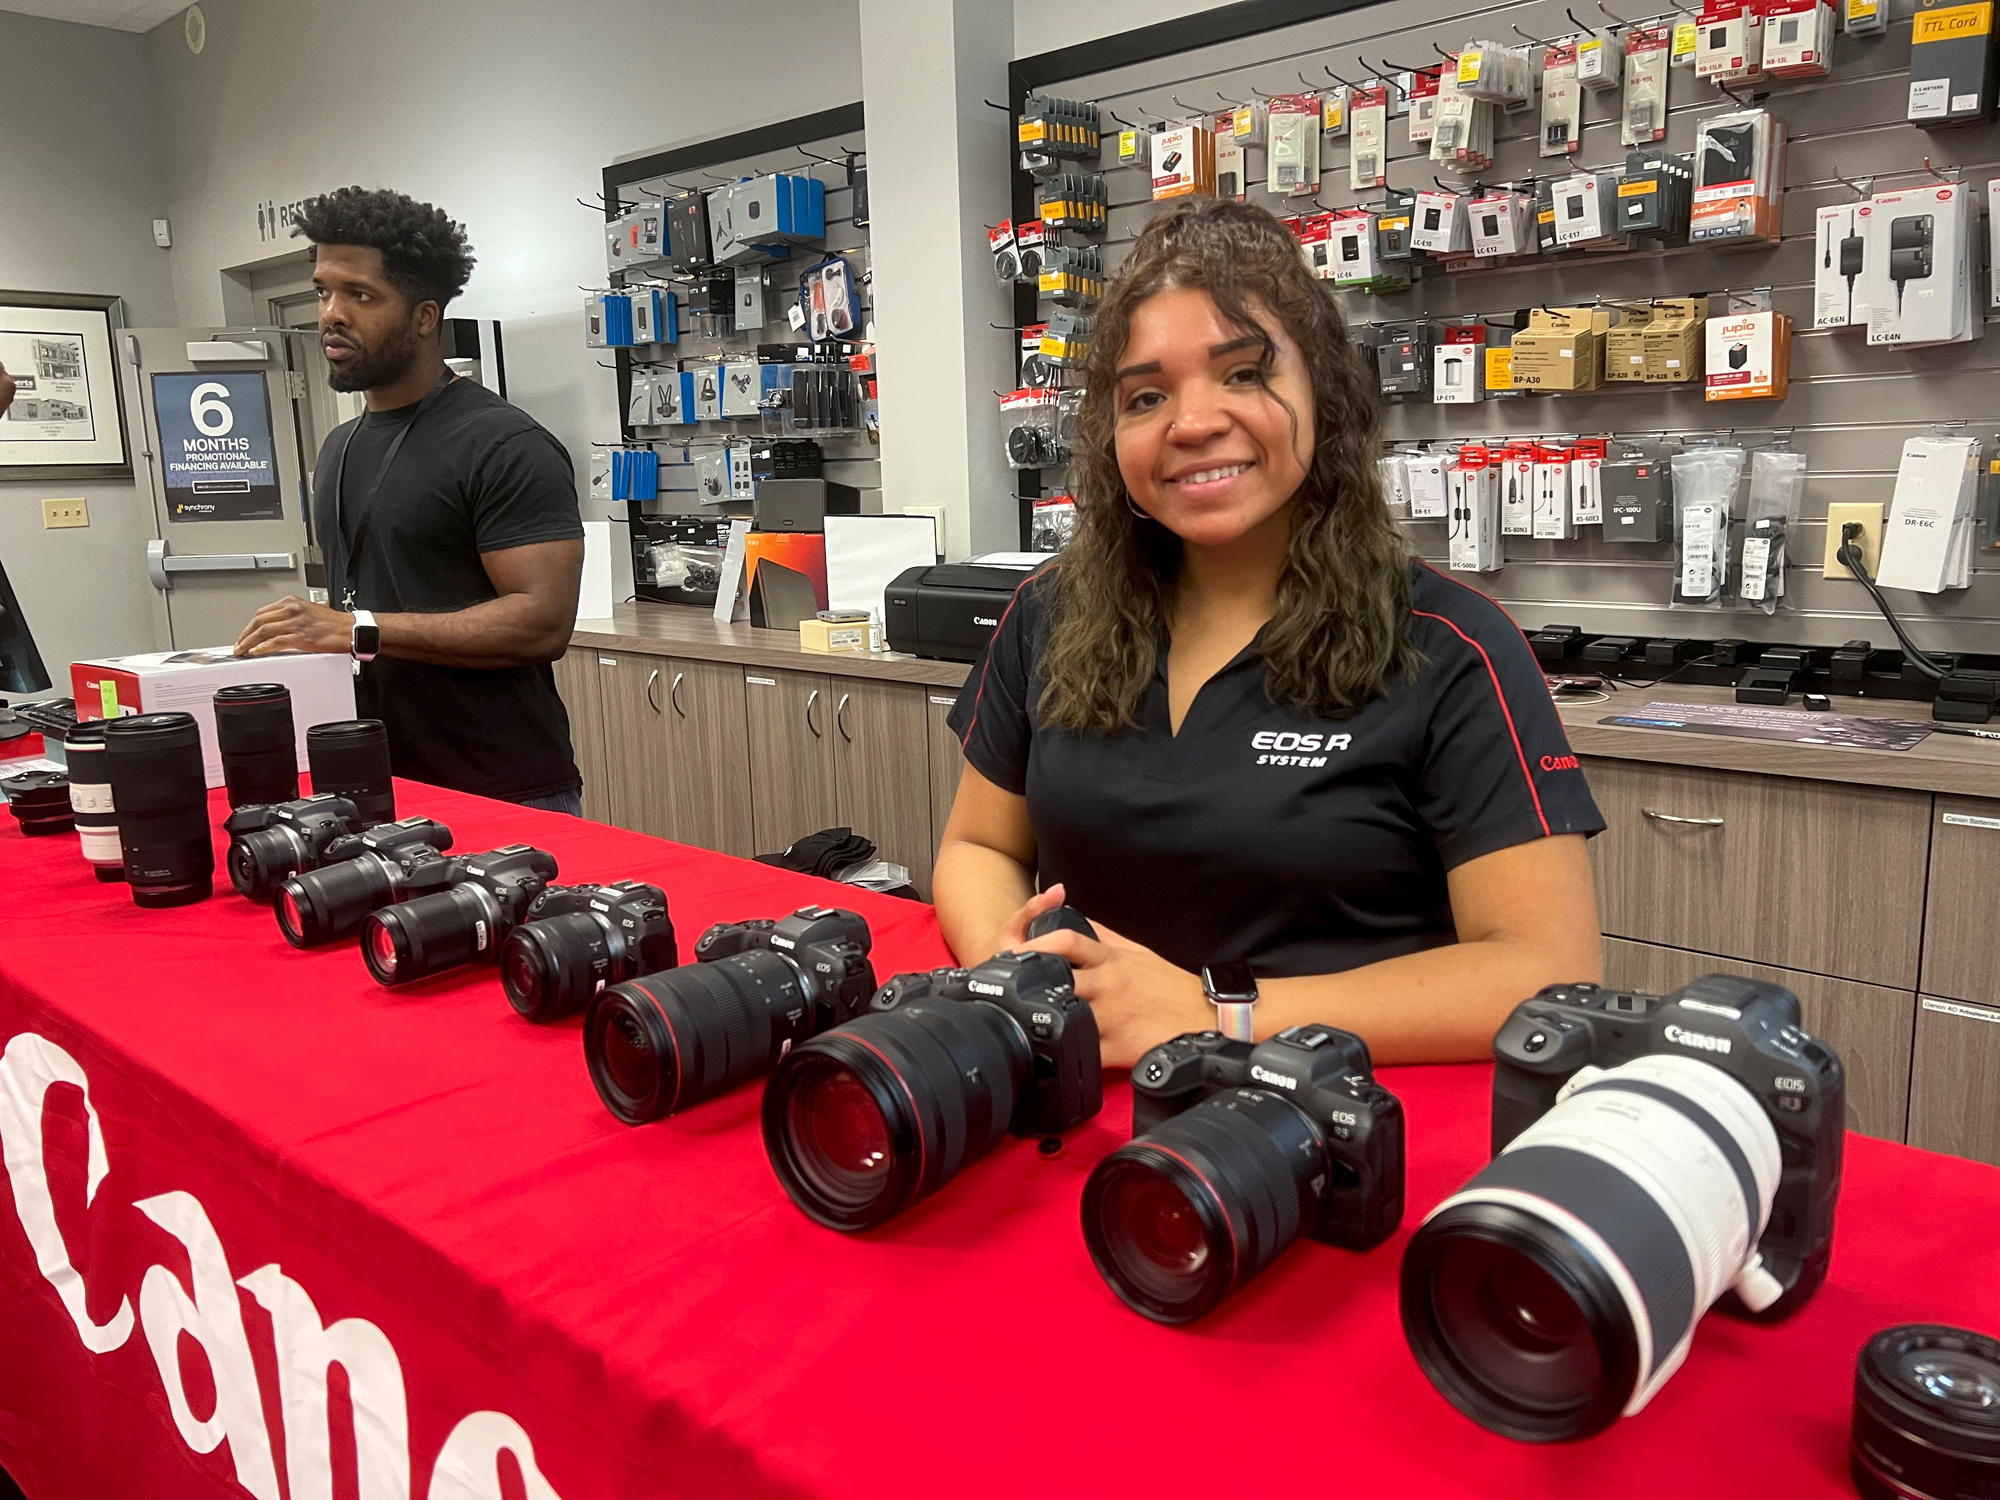 The Canon rep was super busy showing off Canon's latest lenses and camera bodies